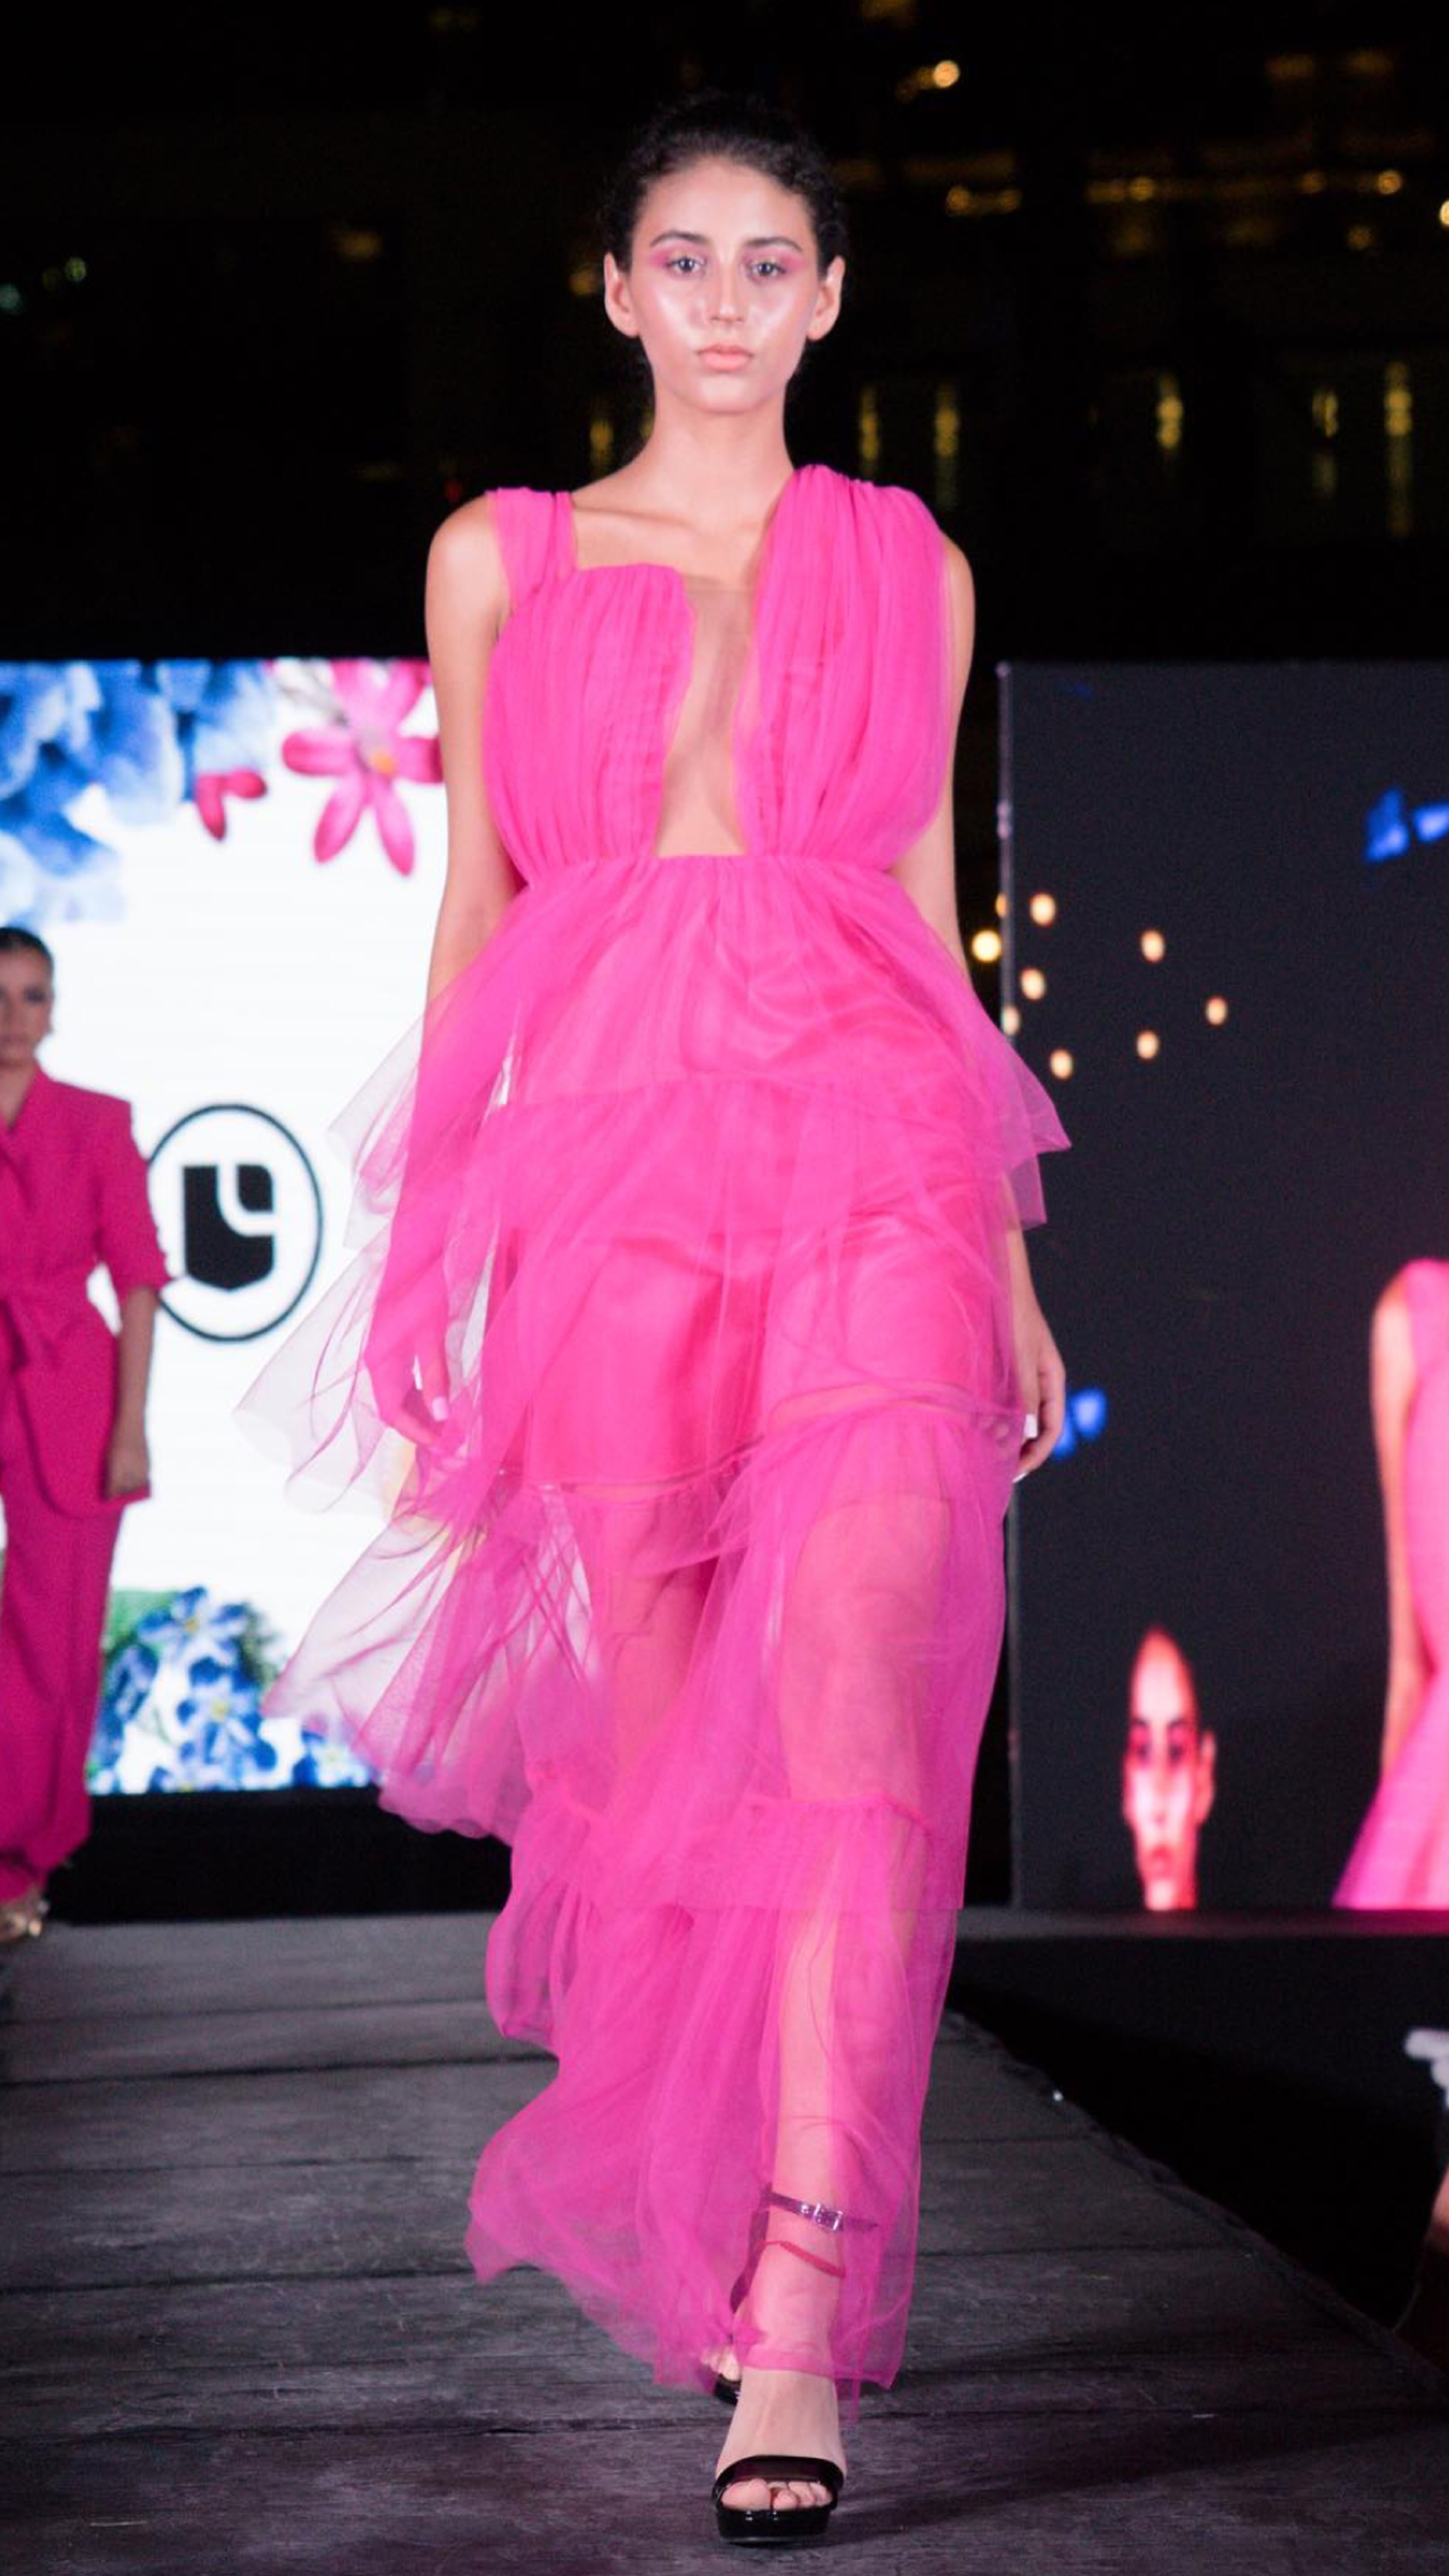 A model strides on a fashion show runway, wearing a bold pink tulle gown with a plunging neckline.